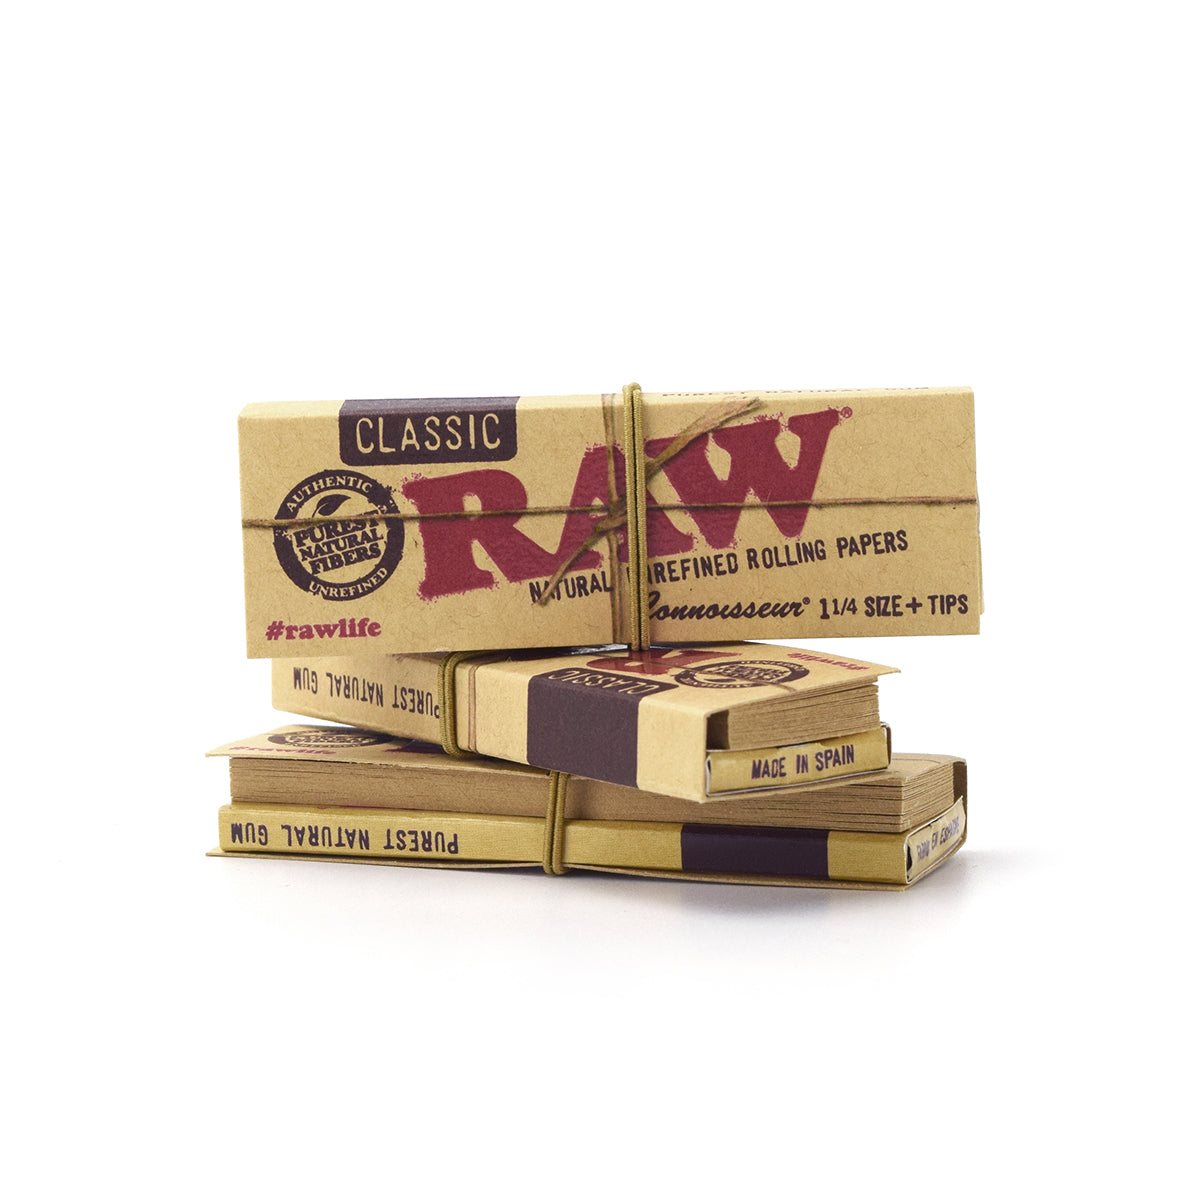 RAW Connoisseur 1 1/4 Medium Size Papers + Tips(Full Box)